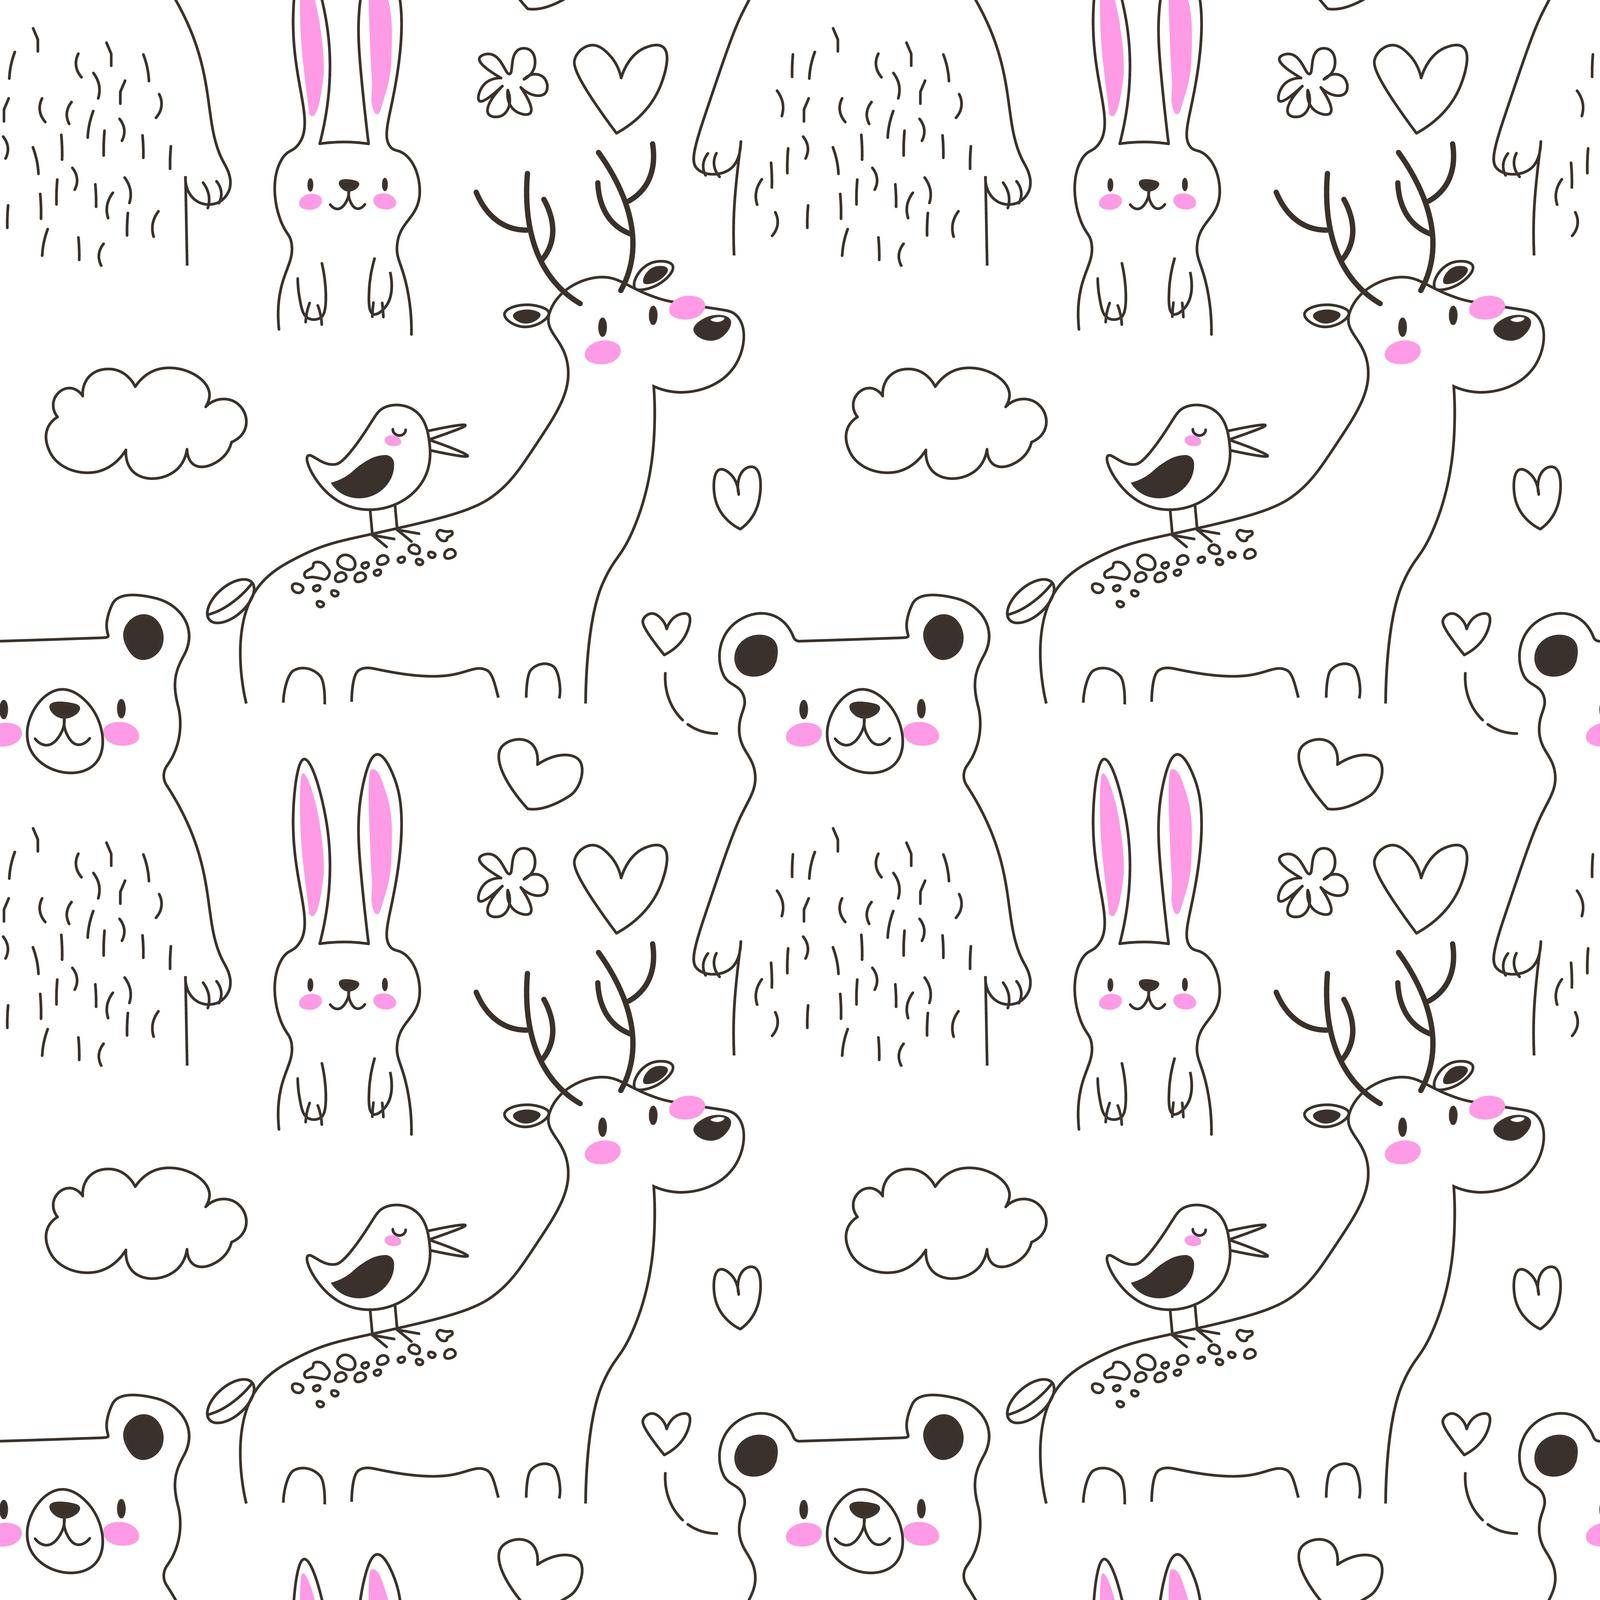 Hand drawn line art cartoon doodle animal seamless pattern in vector. Repeated forest animal illustrations on the white background